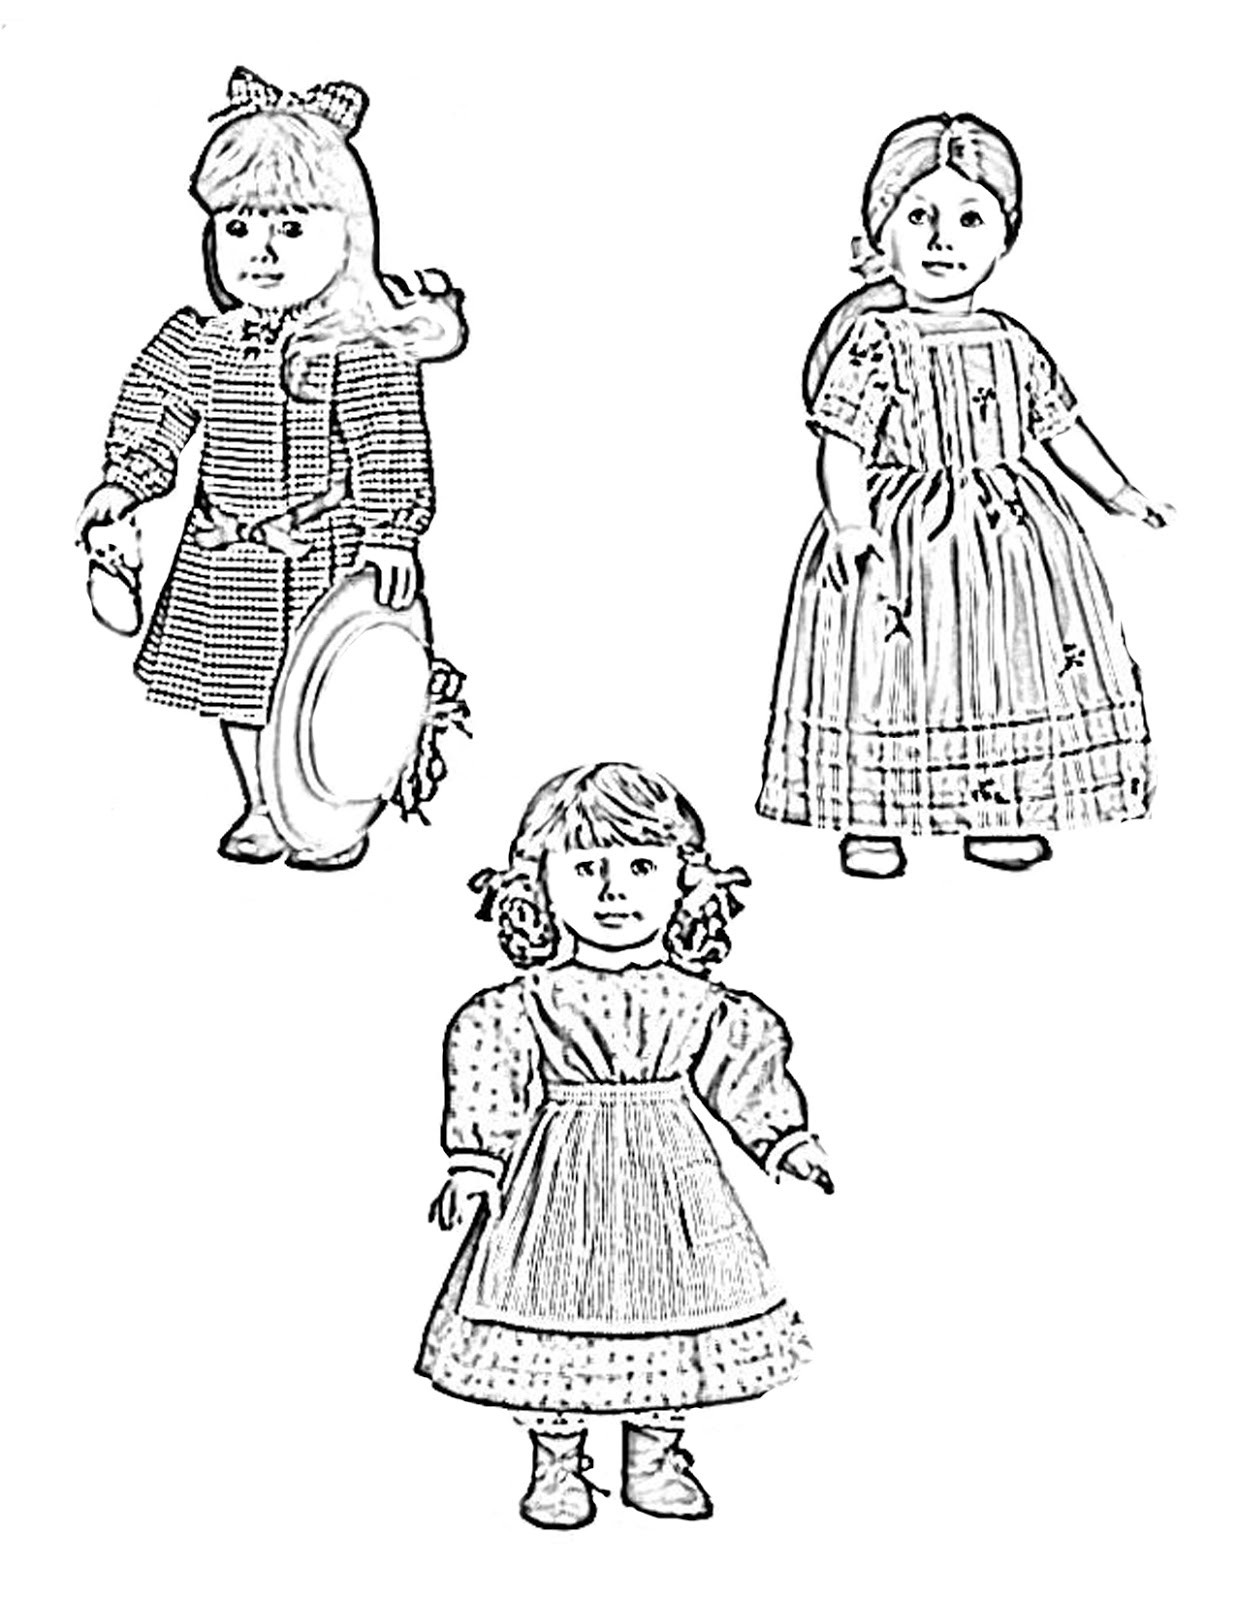 American Girl Isabelle Coloring Pages
 American Doll Isabelle Coloring Pages